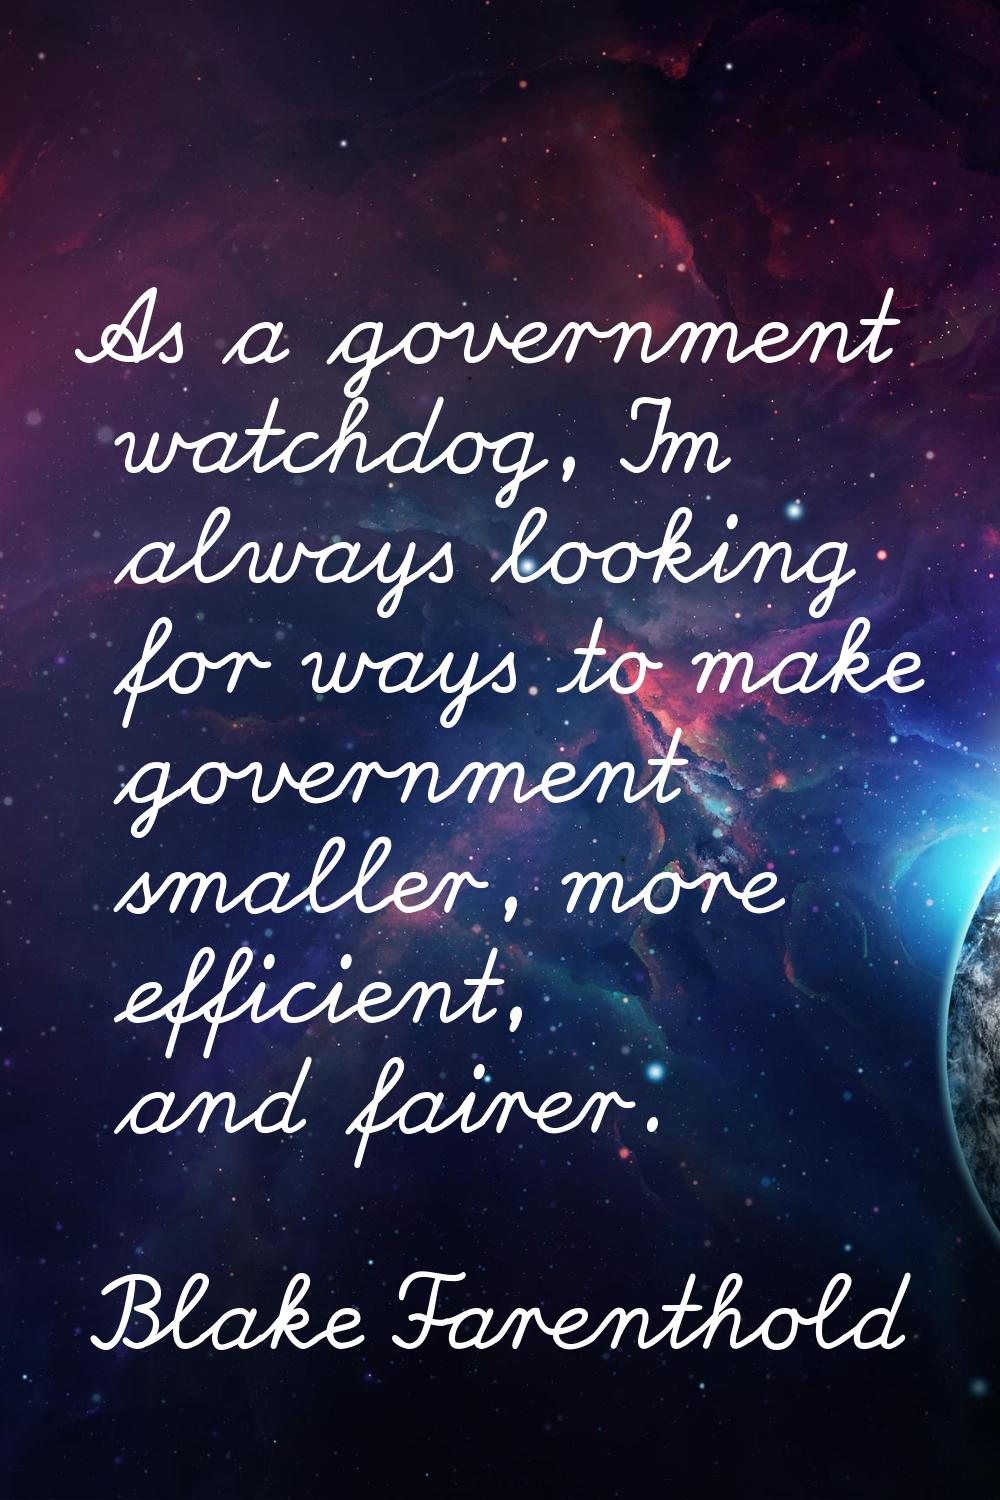 As a government watchdog, I'm always looking for ways to make government smaller, more efficient, a